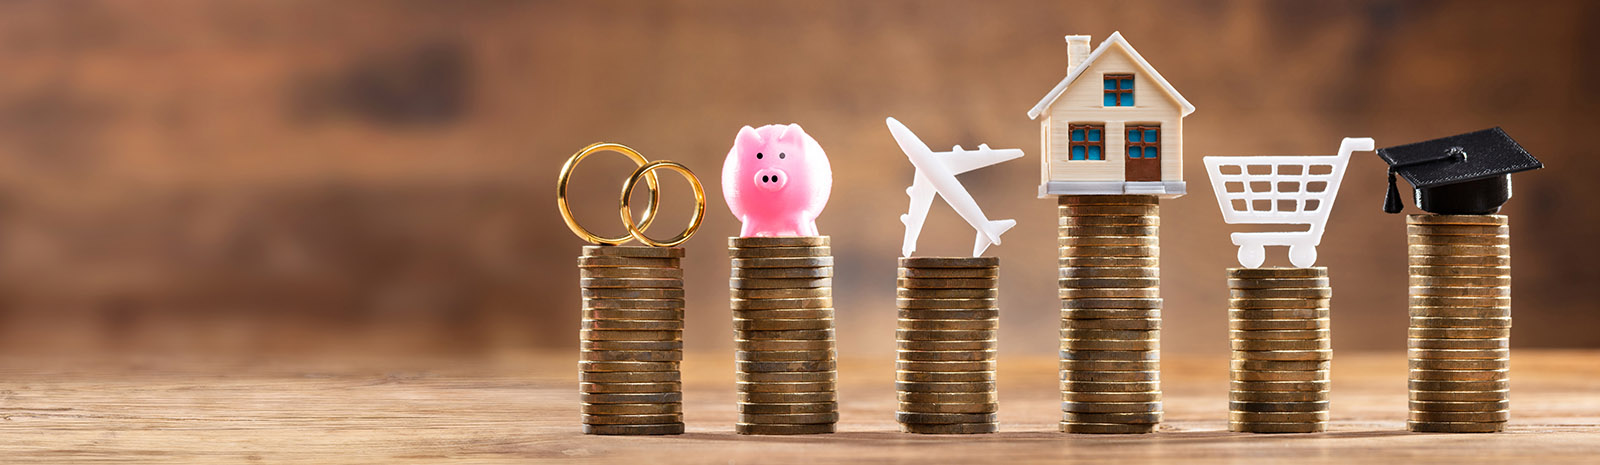 IMAGE: Six stacks of coins, left to right topped with two wedding rings, piggy bank, airplane, home, shopping cart, graduation cap.